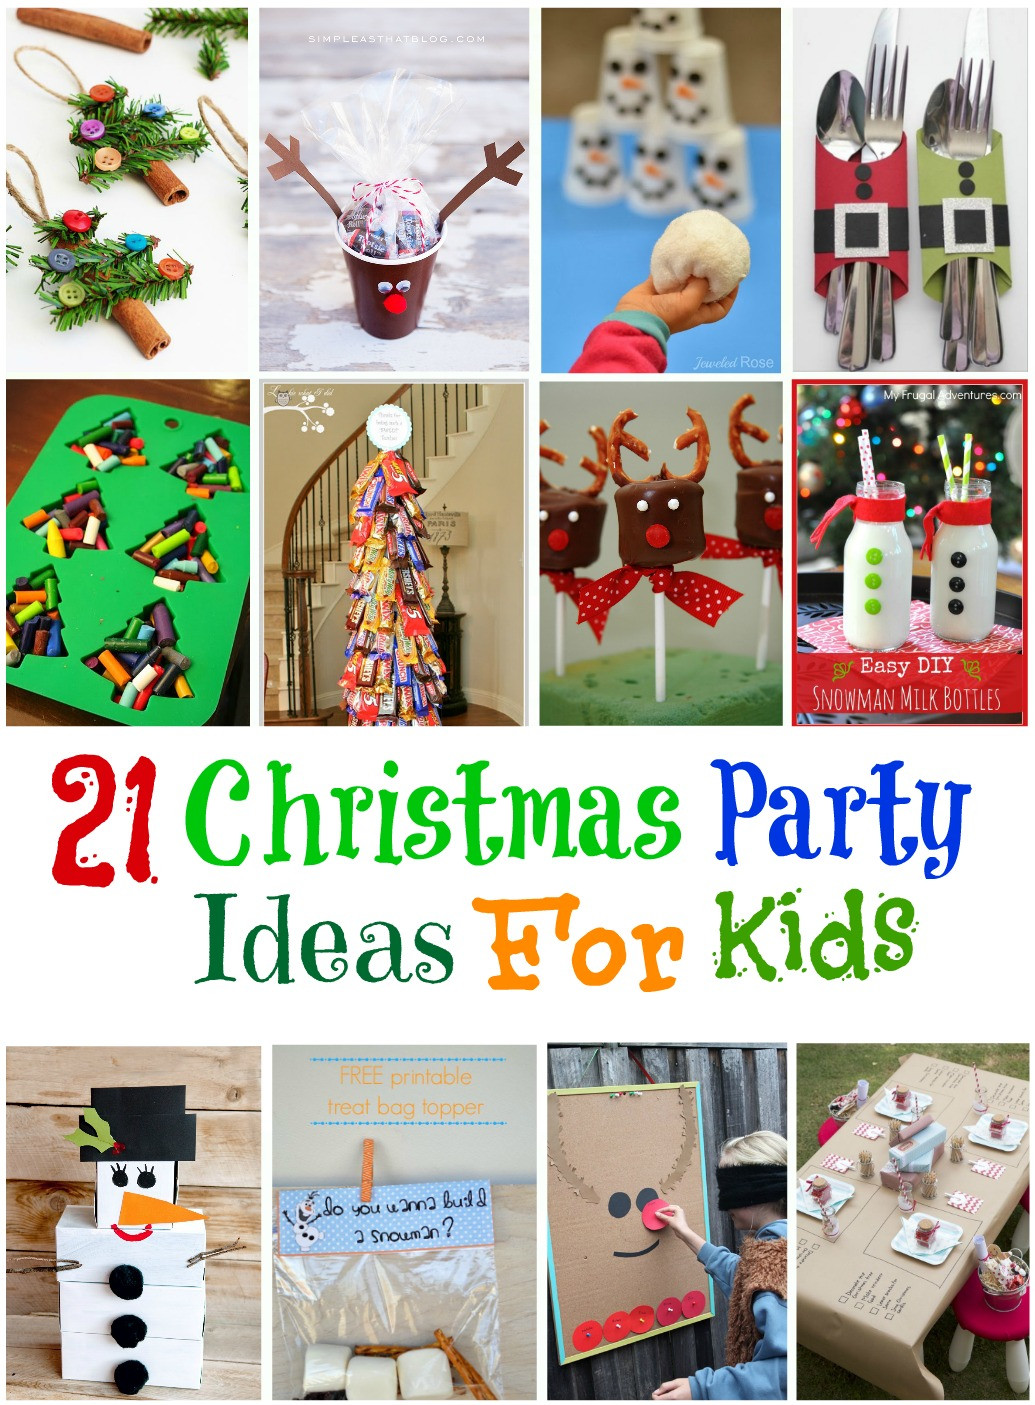 The top 24 Ideas About Christmas Party themes for Kids - Home, Family ...